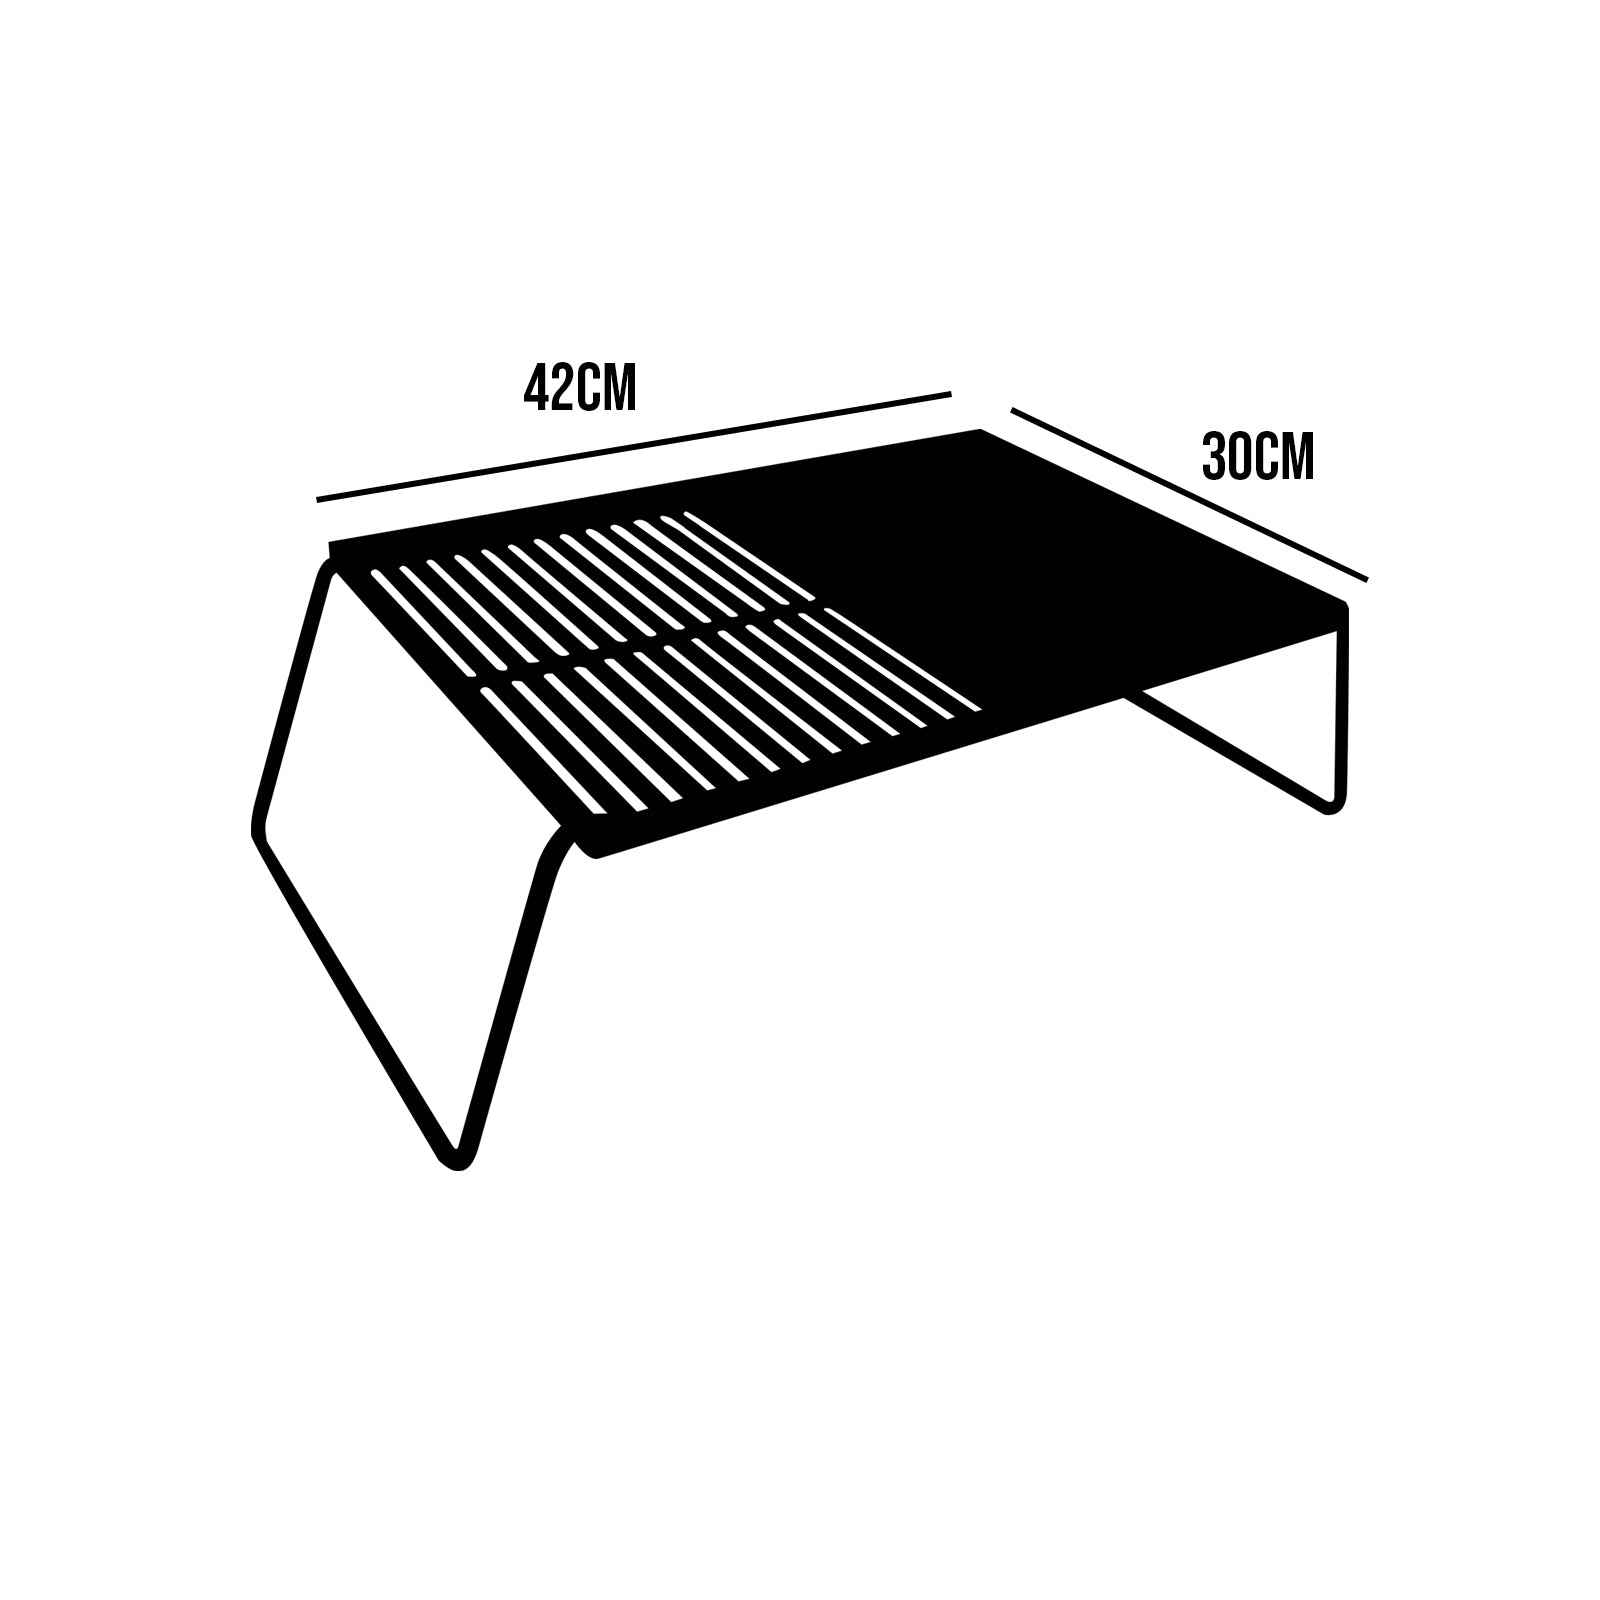 Fry and Braai Grill Stand Dimensions